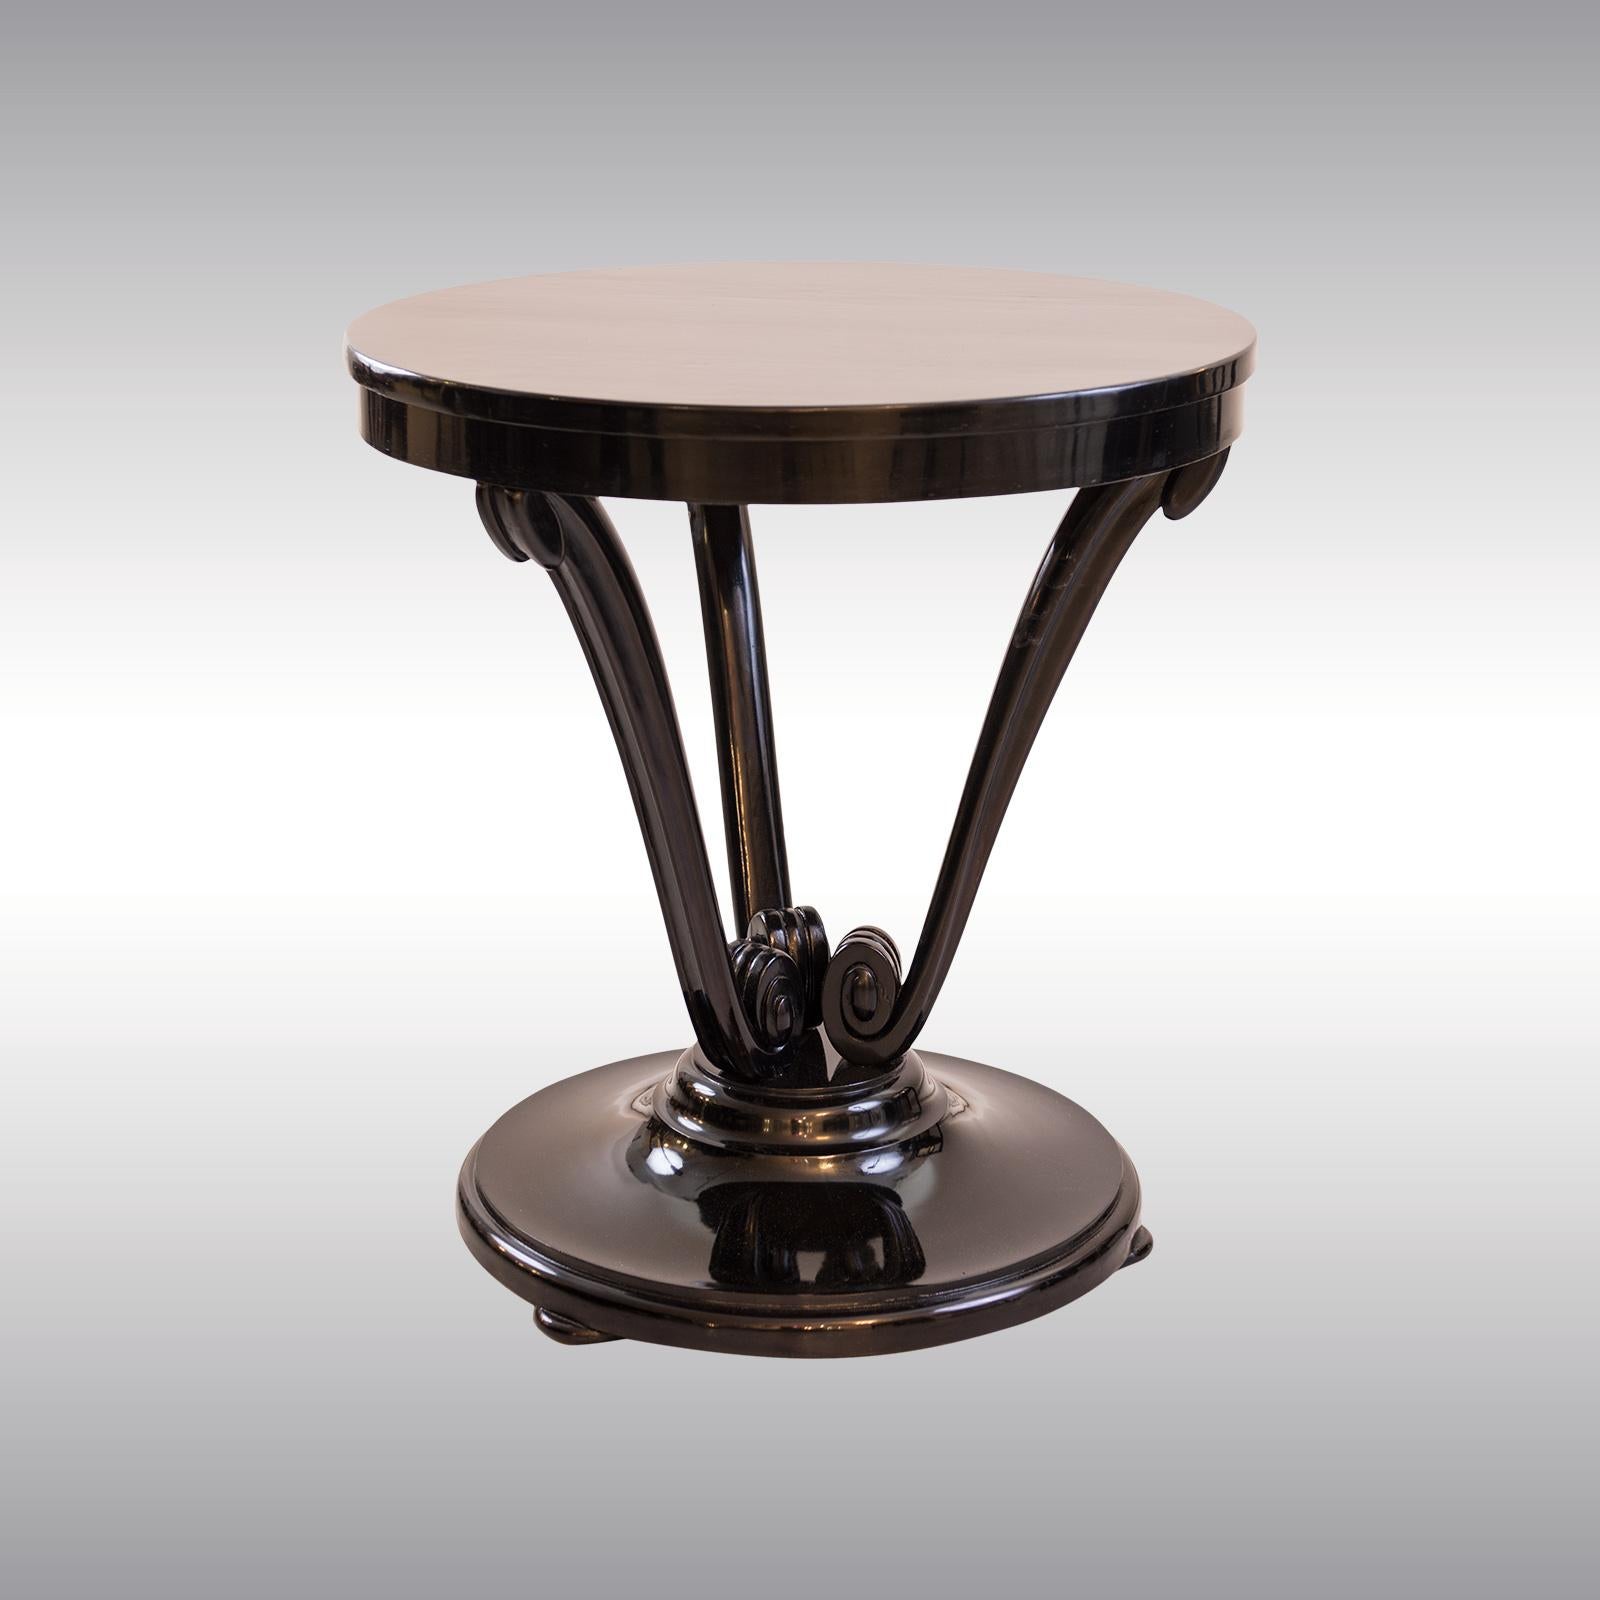 Elegant coffee table with volute carved legs
Material

Beechwood, black stained, signs of age and use.